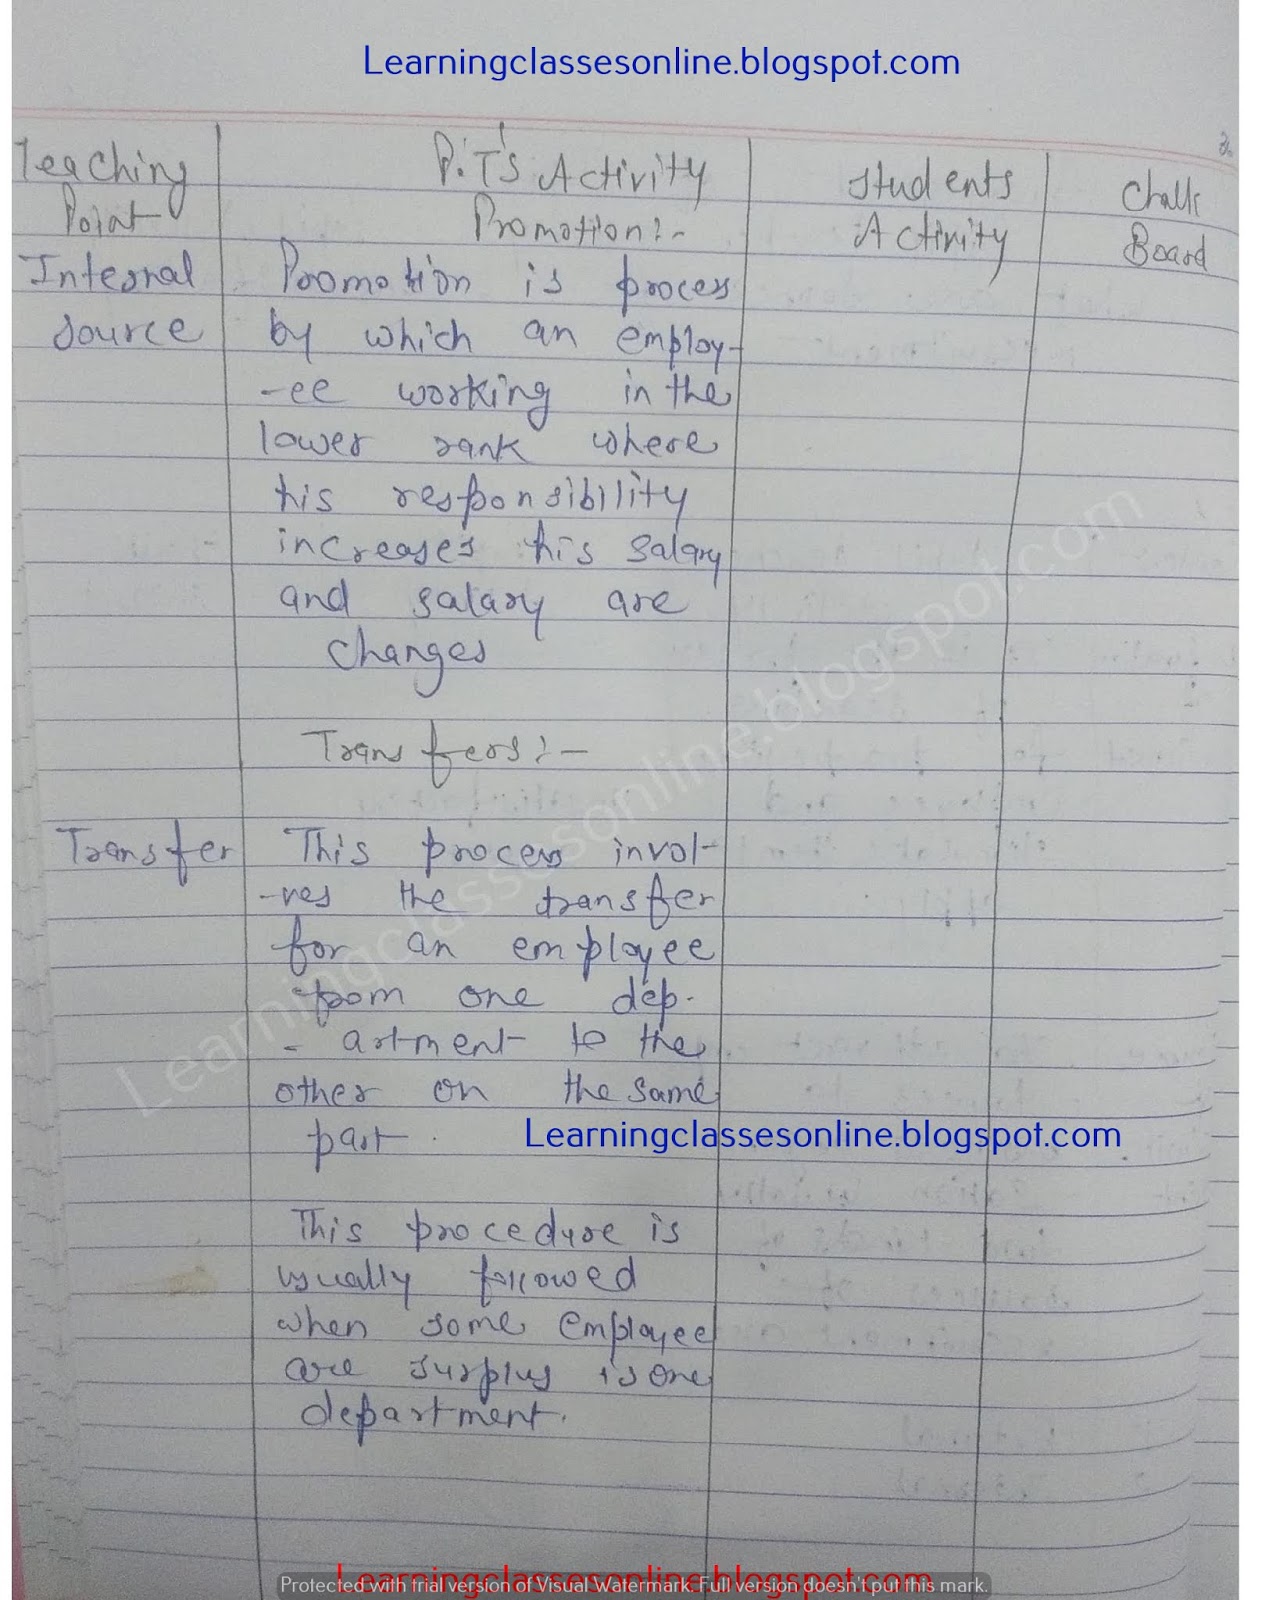 detailed lesson plan in accounting lesson plan for accounting concepts lesson plan for accounting grade 10 sample detailed lesson plan in accounting lesson plan for accountancy class xii